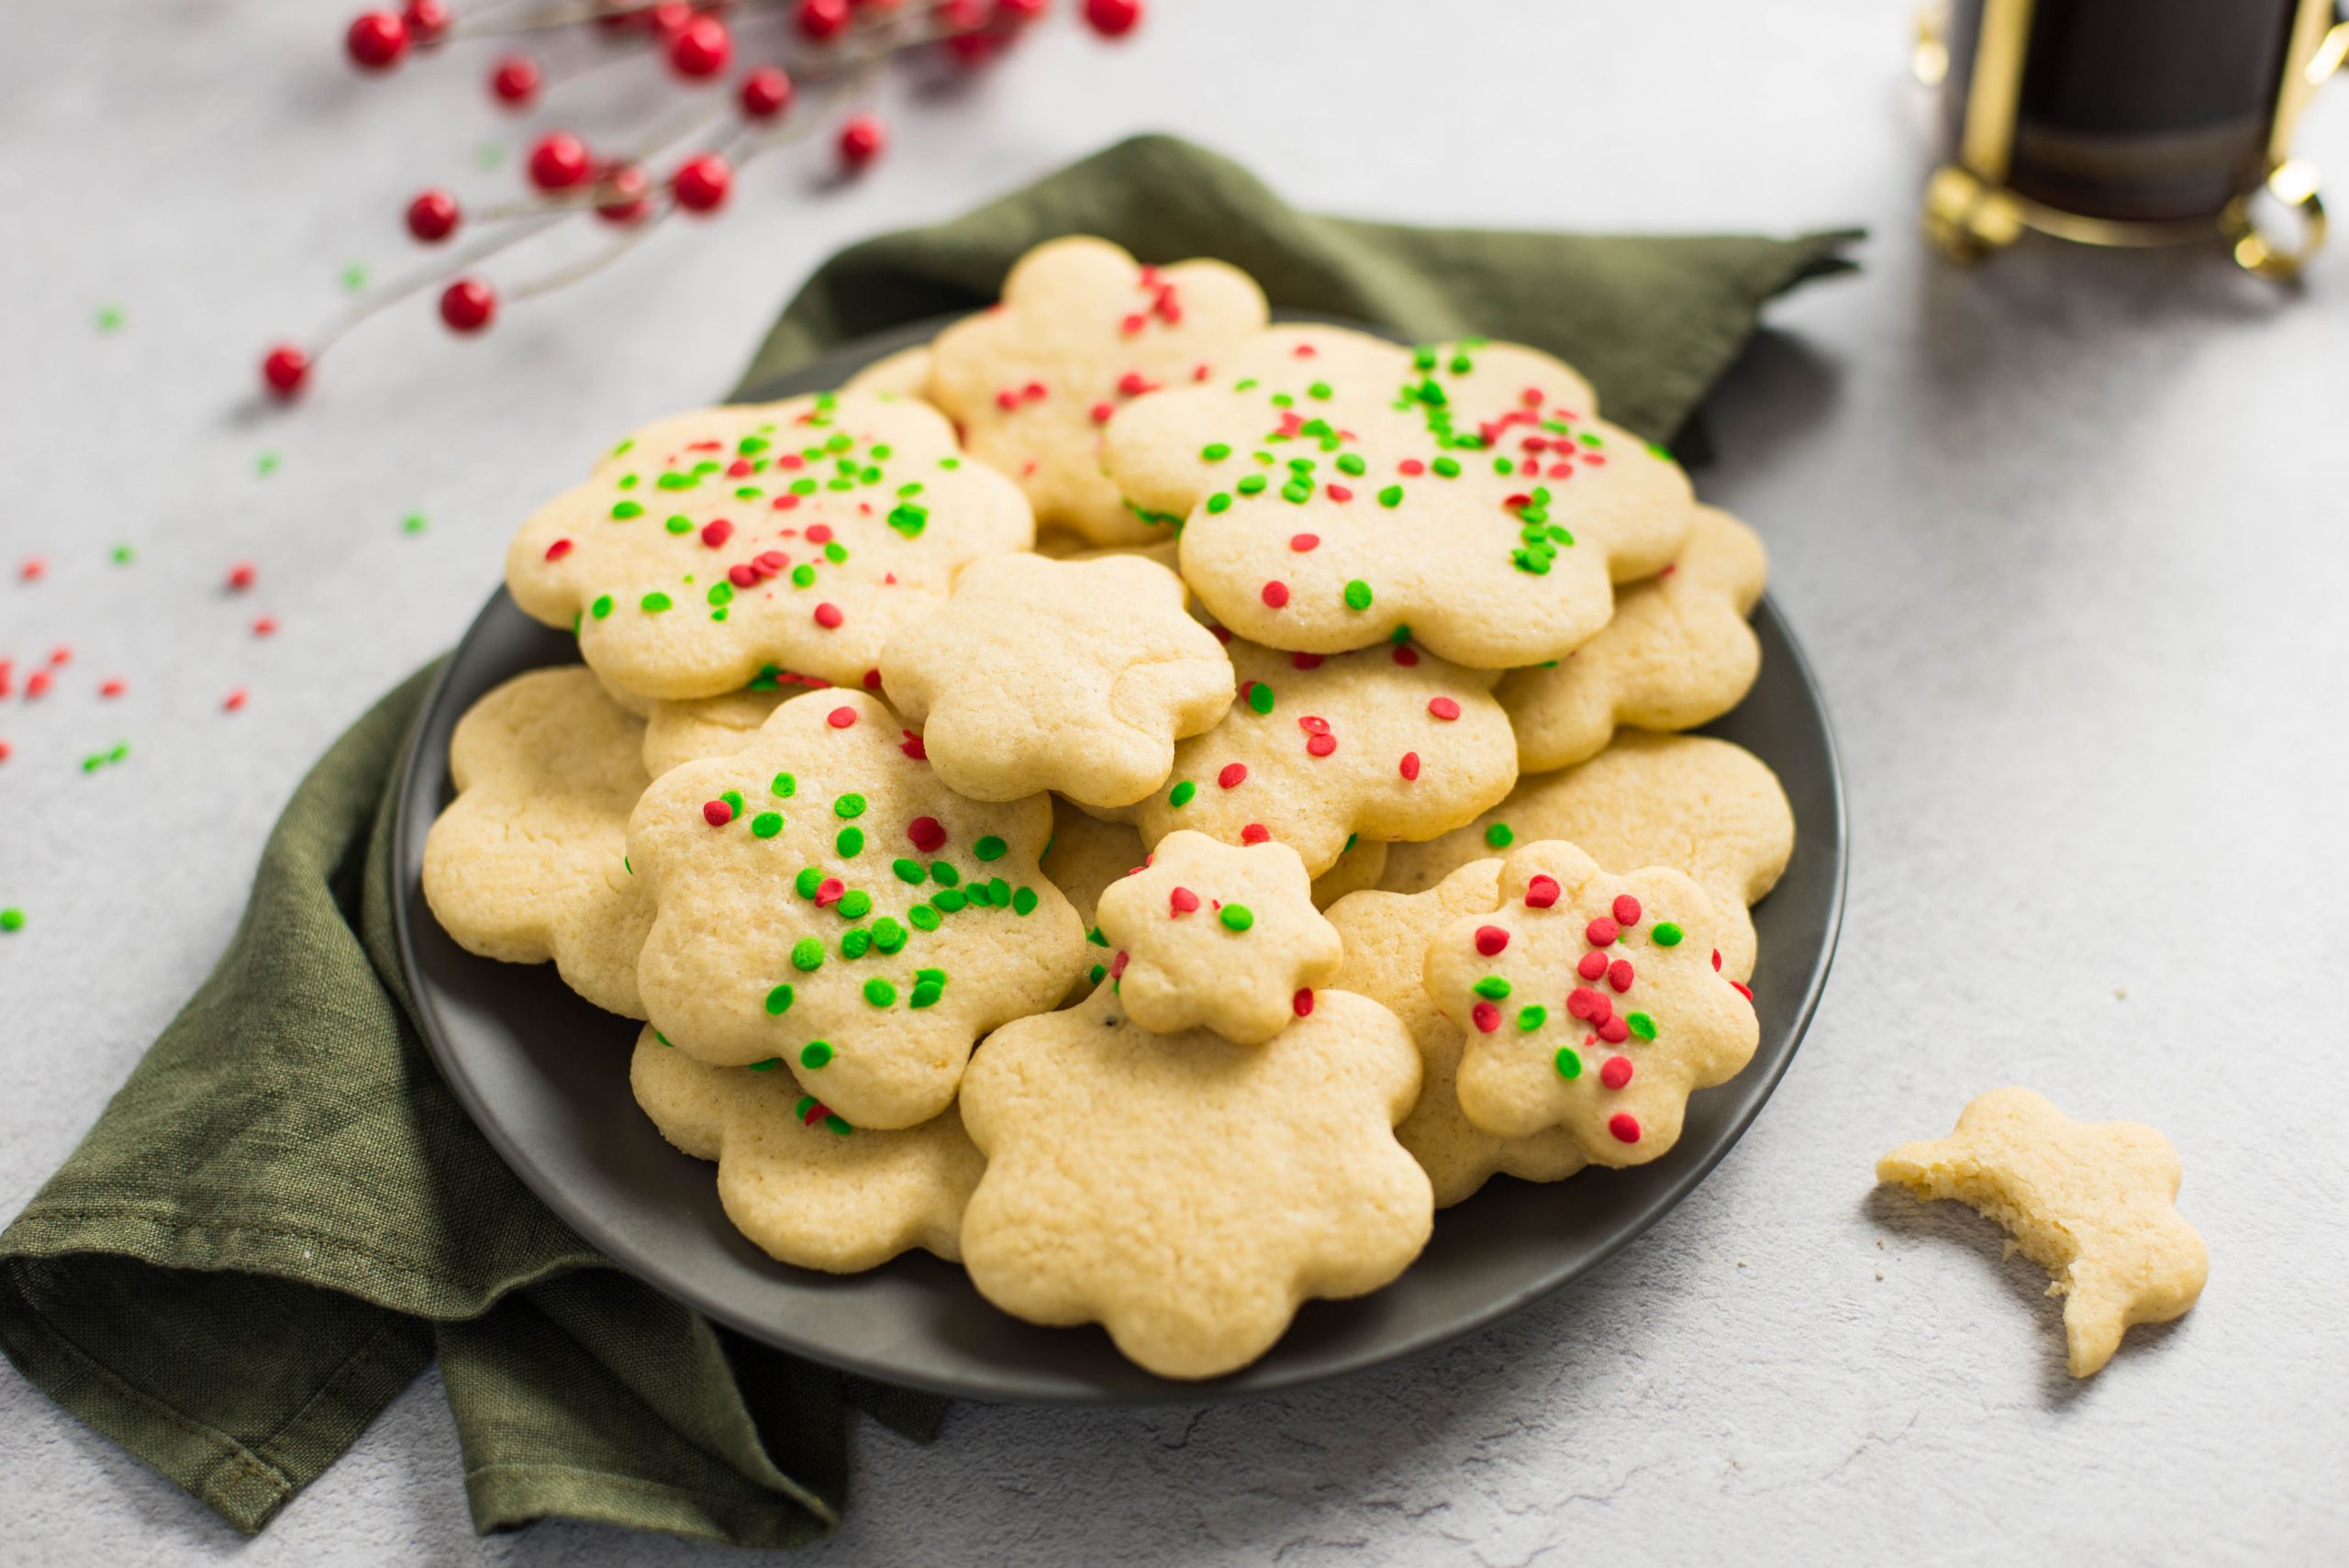 15 Of the Best Ideas for Low Calorie Sugar Cookies